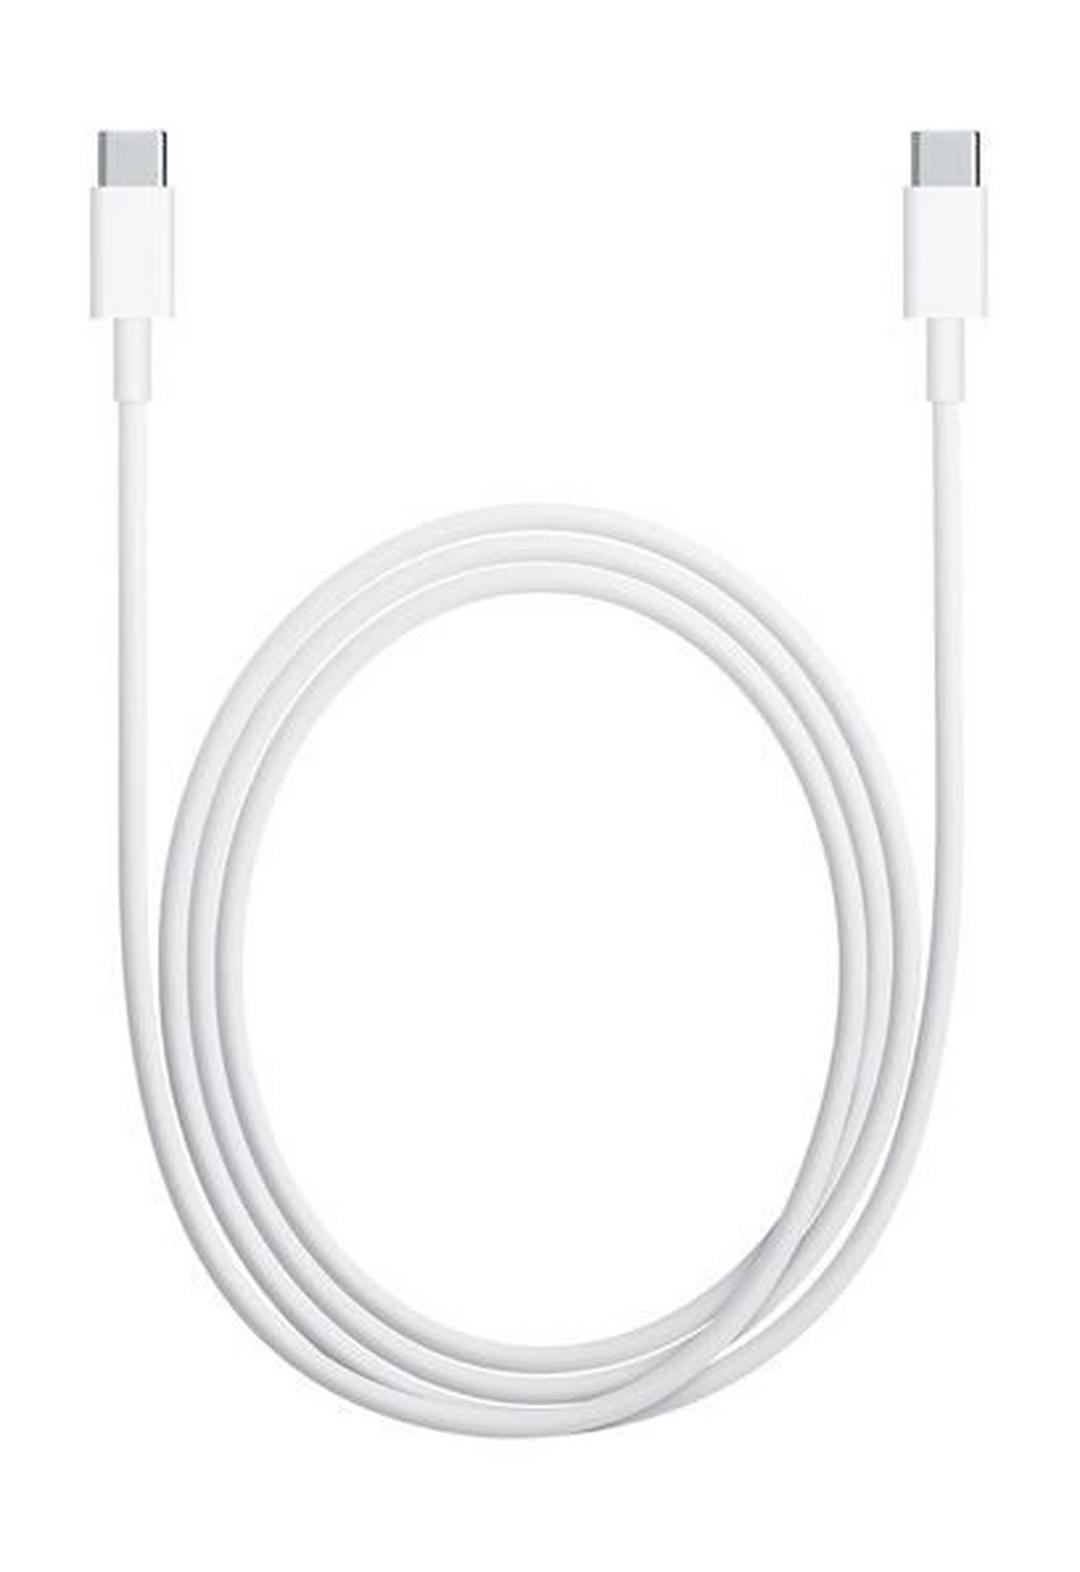 Apple MJWT2ZM/A 2-Meter USB-C Charge Cable - White